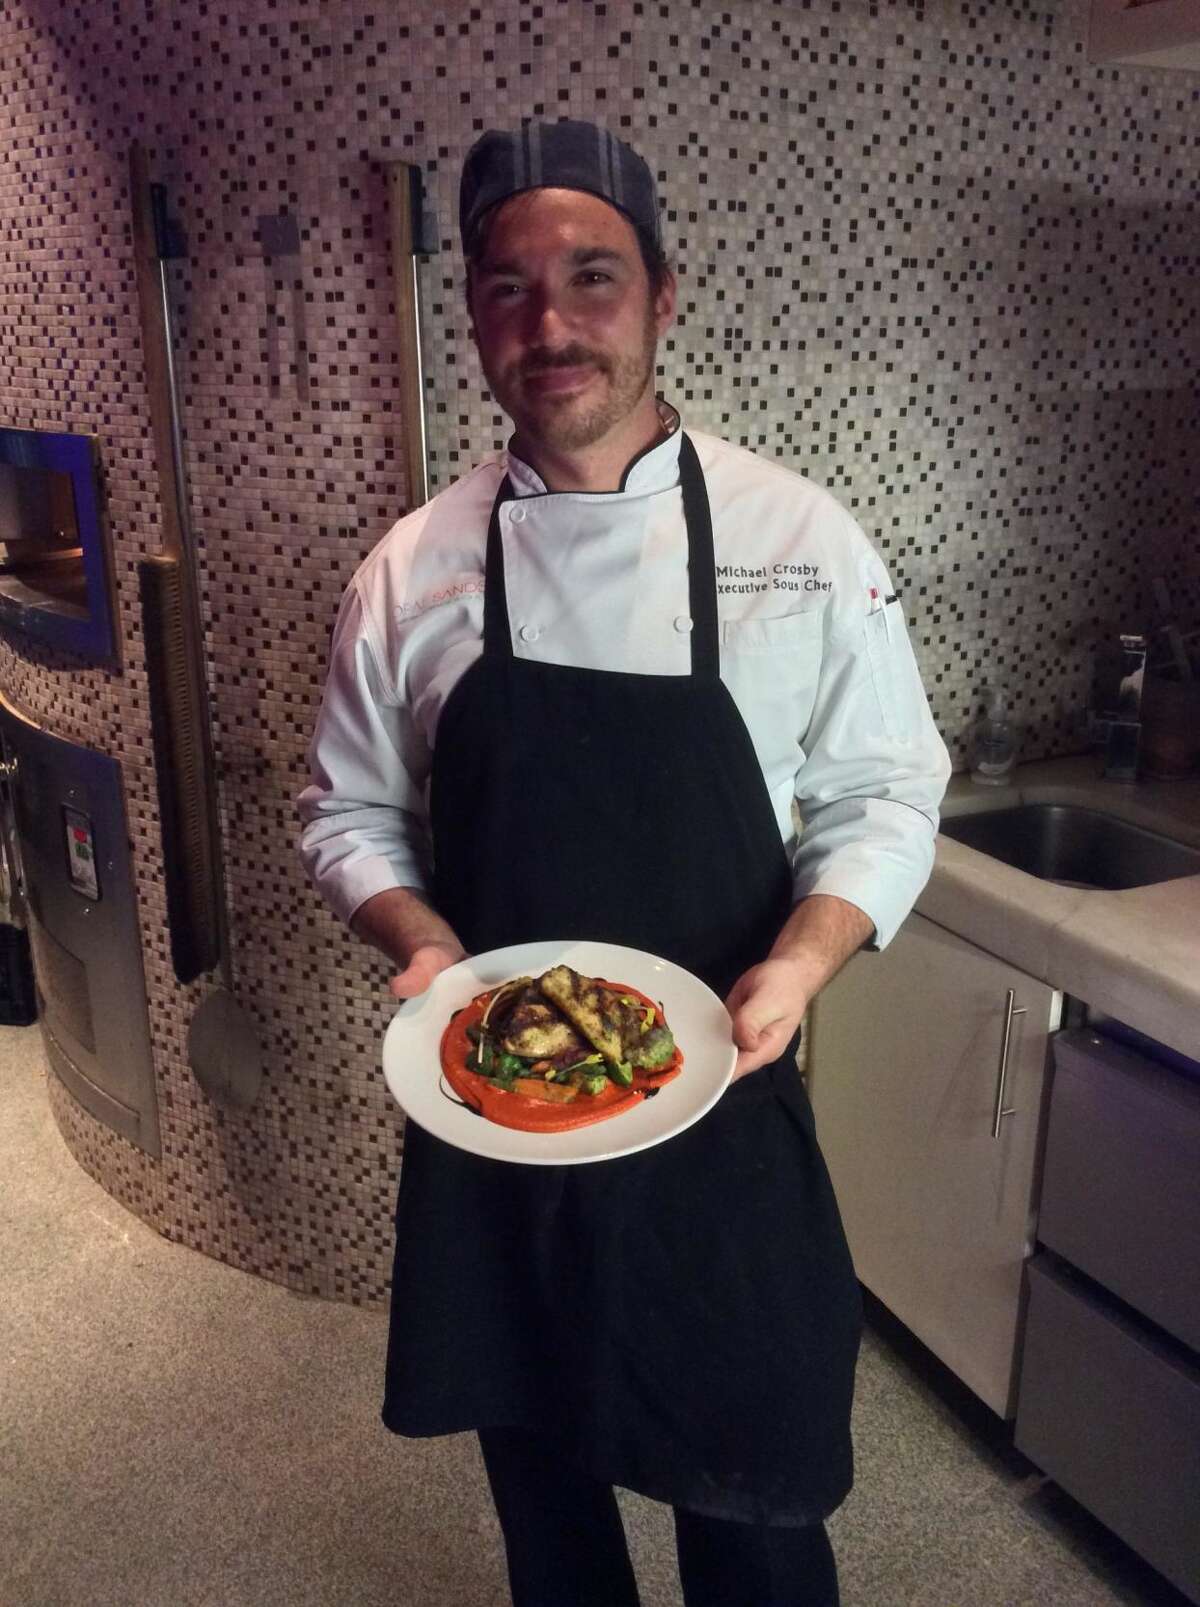 Chef Mike Crosby of Sea-Guini shows off grilled Cobia, served with a pesto roasted vegetable medley and smoked almond romesco, and aged balsamic.